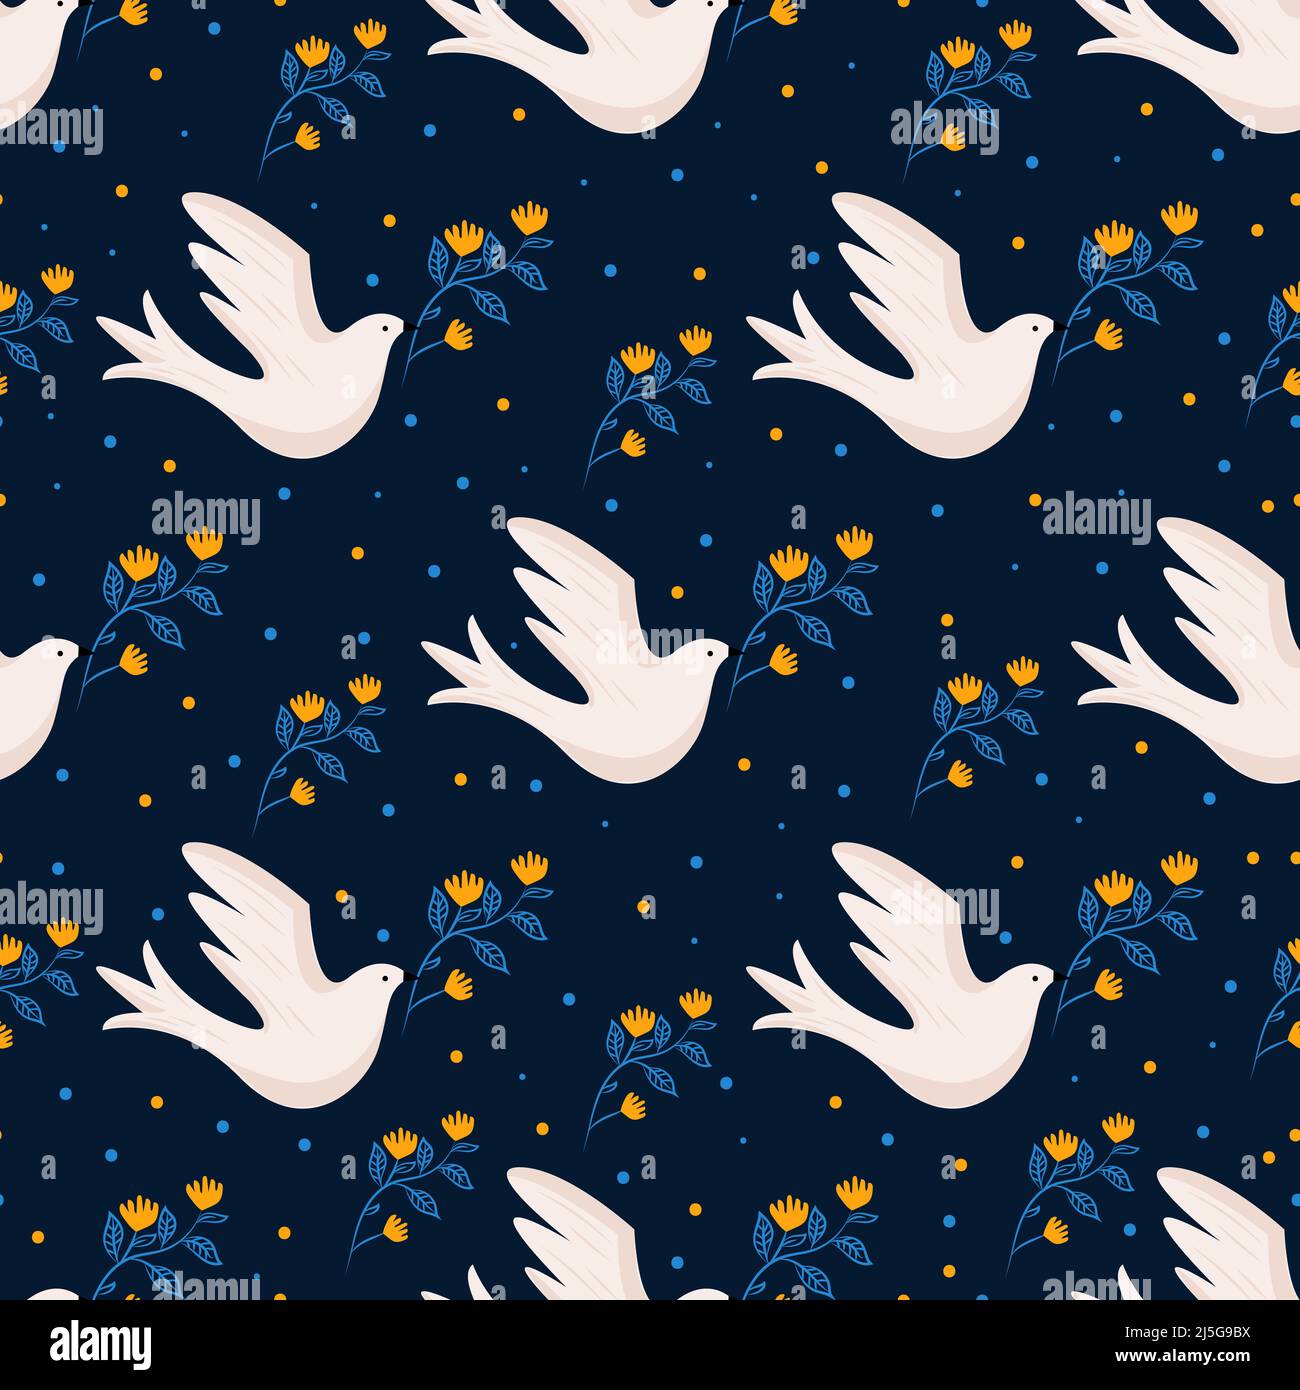 Seamless vector pattern with doves, plants, and feathers. Background with flying birds and plants in yellow and blue colors. Stock Vector